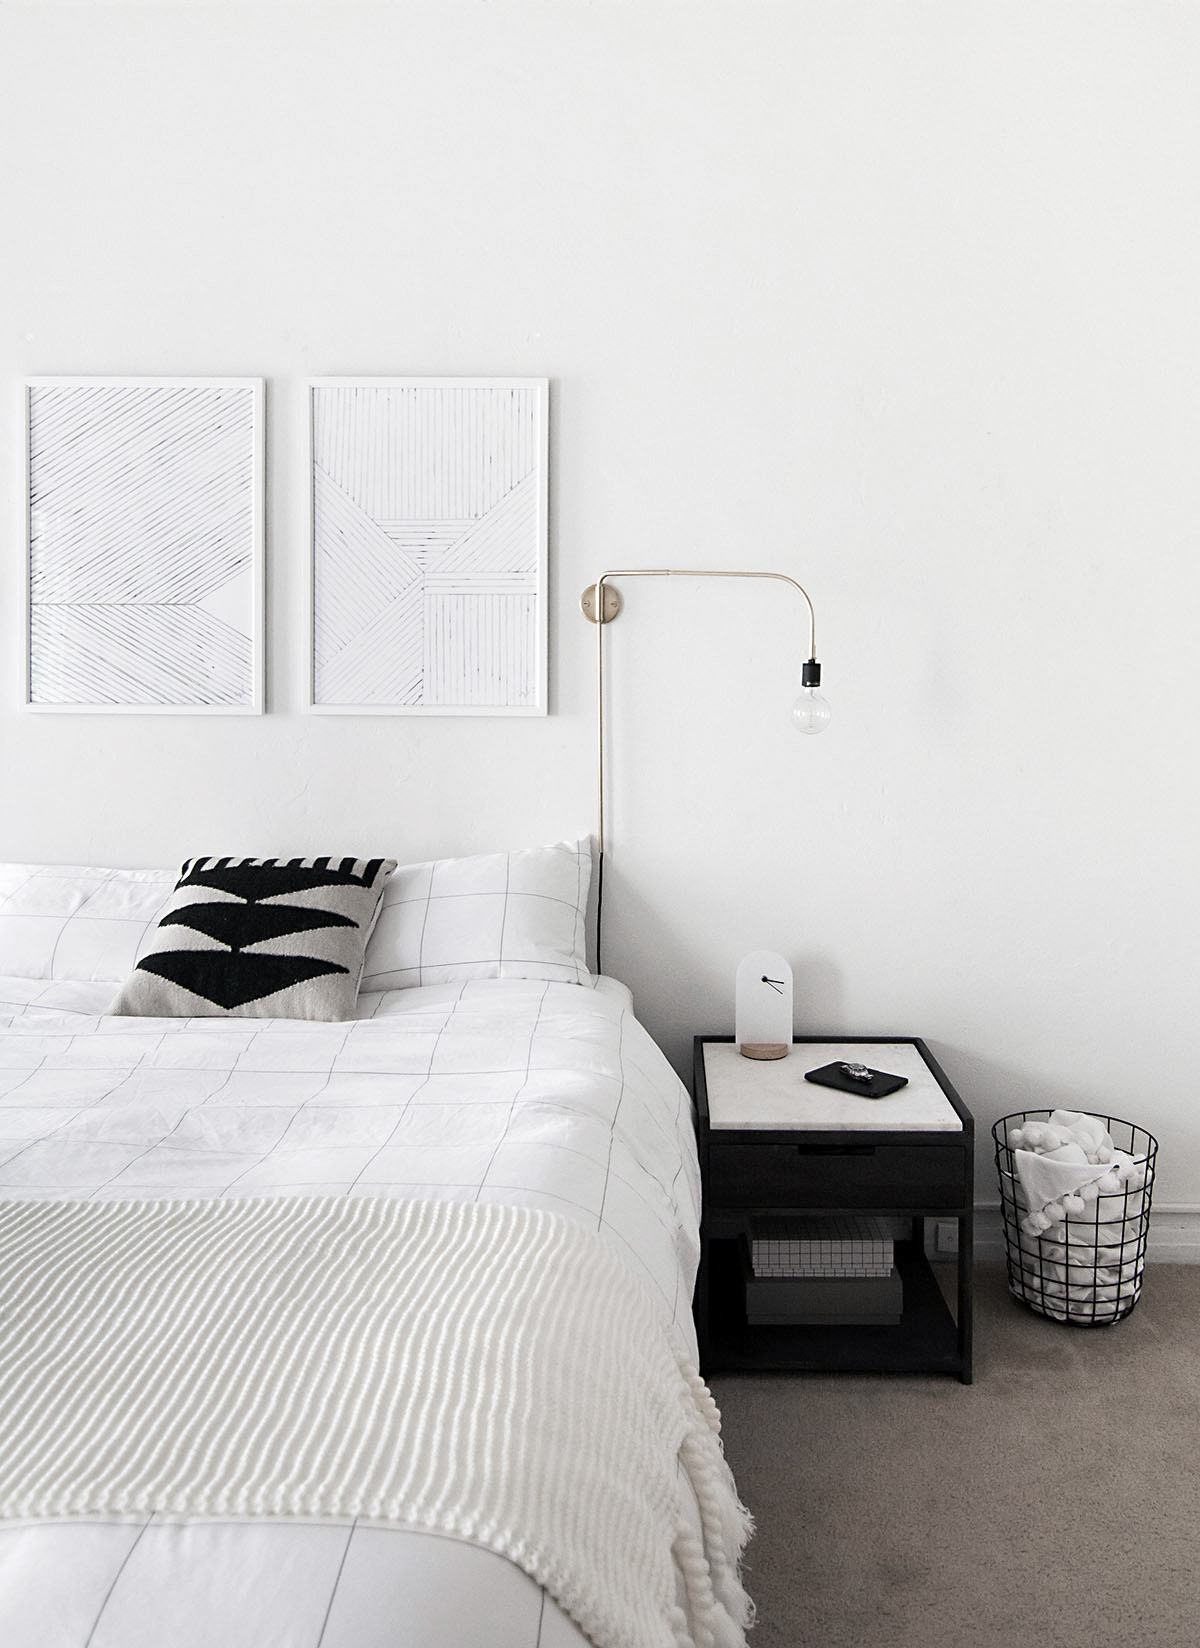 Creatice Black And White Minimalist Bedroom for Small Space